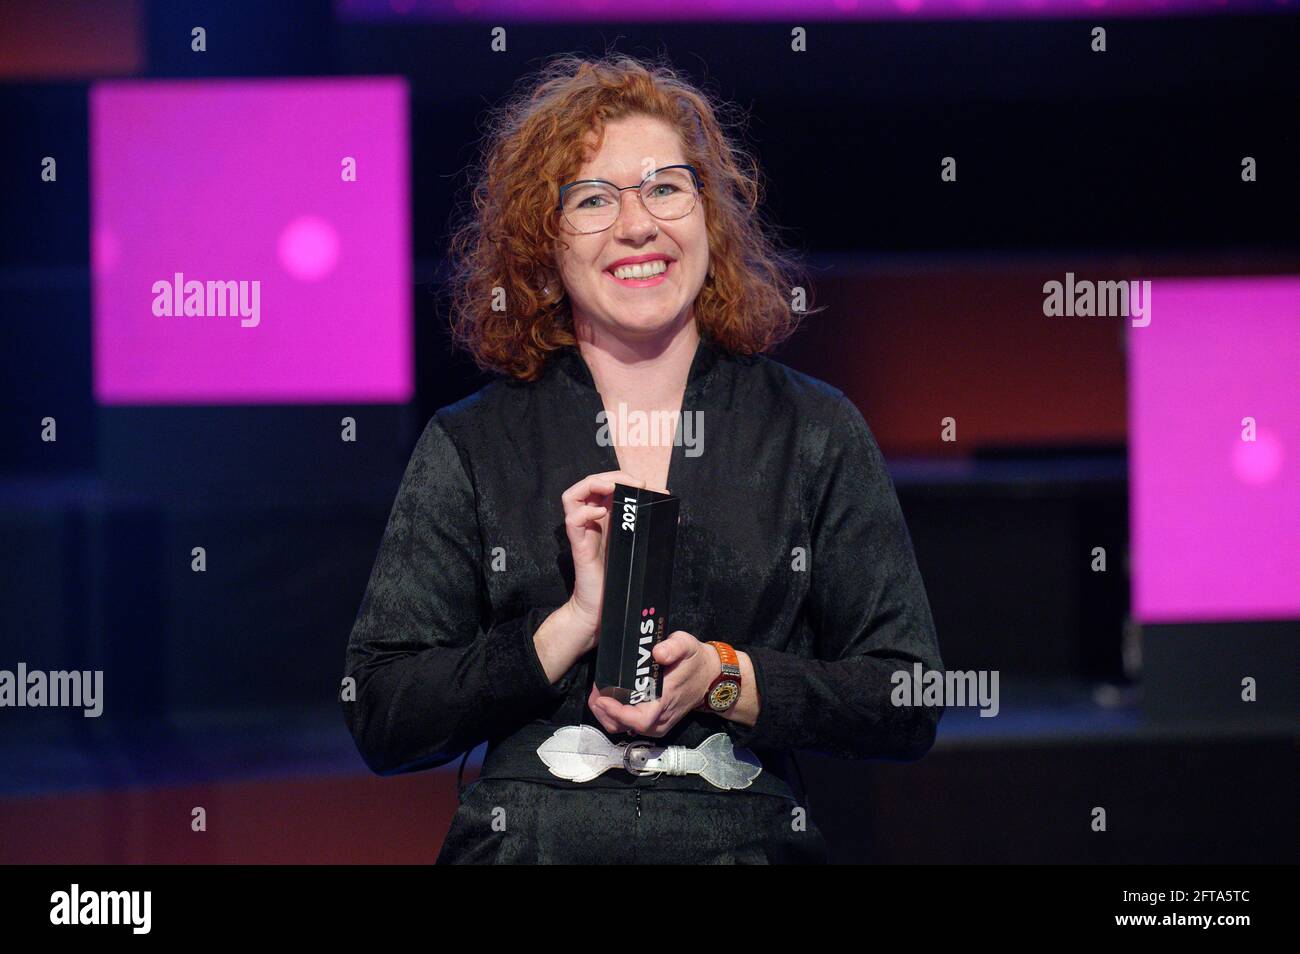 Cologne, Germany. 21st May, 2021. At the Civis Media Awards ceremony, author Sabine Wachs was delighted to receive the prize in the category 'Civis Audio Award, Short' for 'Der Morgen: Uns bleiben nur die Worte'. Credit: Henning Kaiser/dpa/Alamy Live News Stock Photo